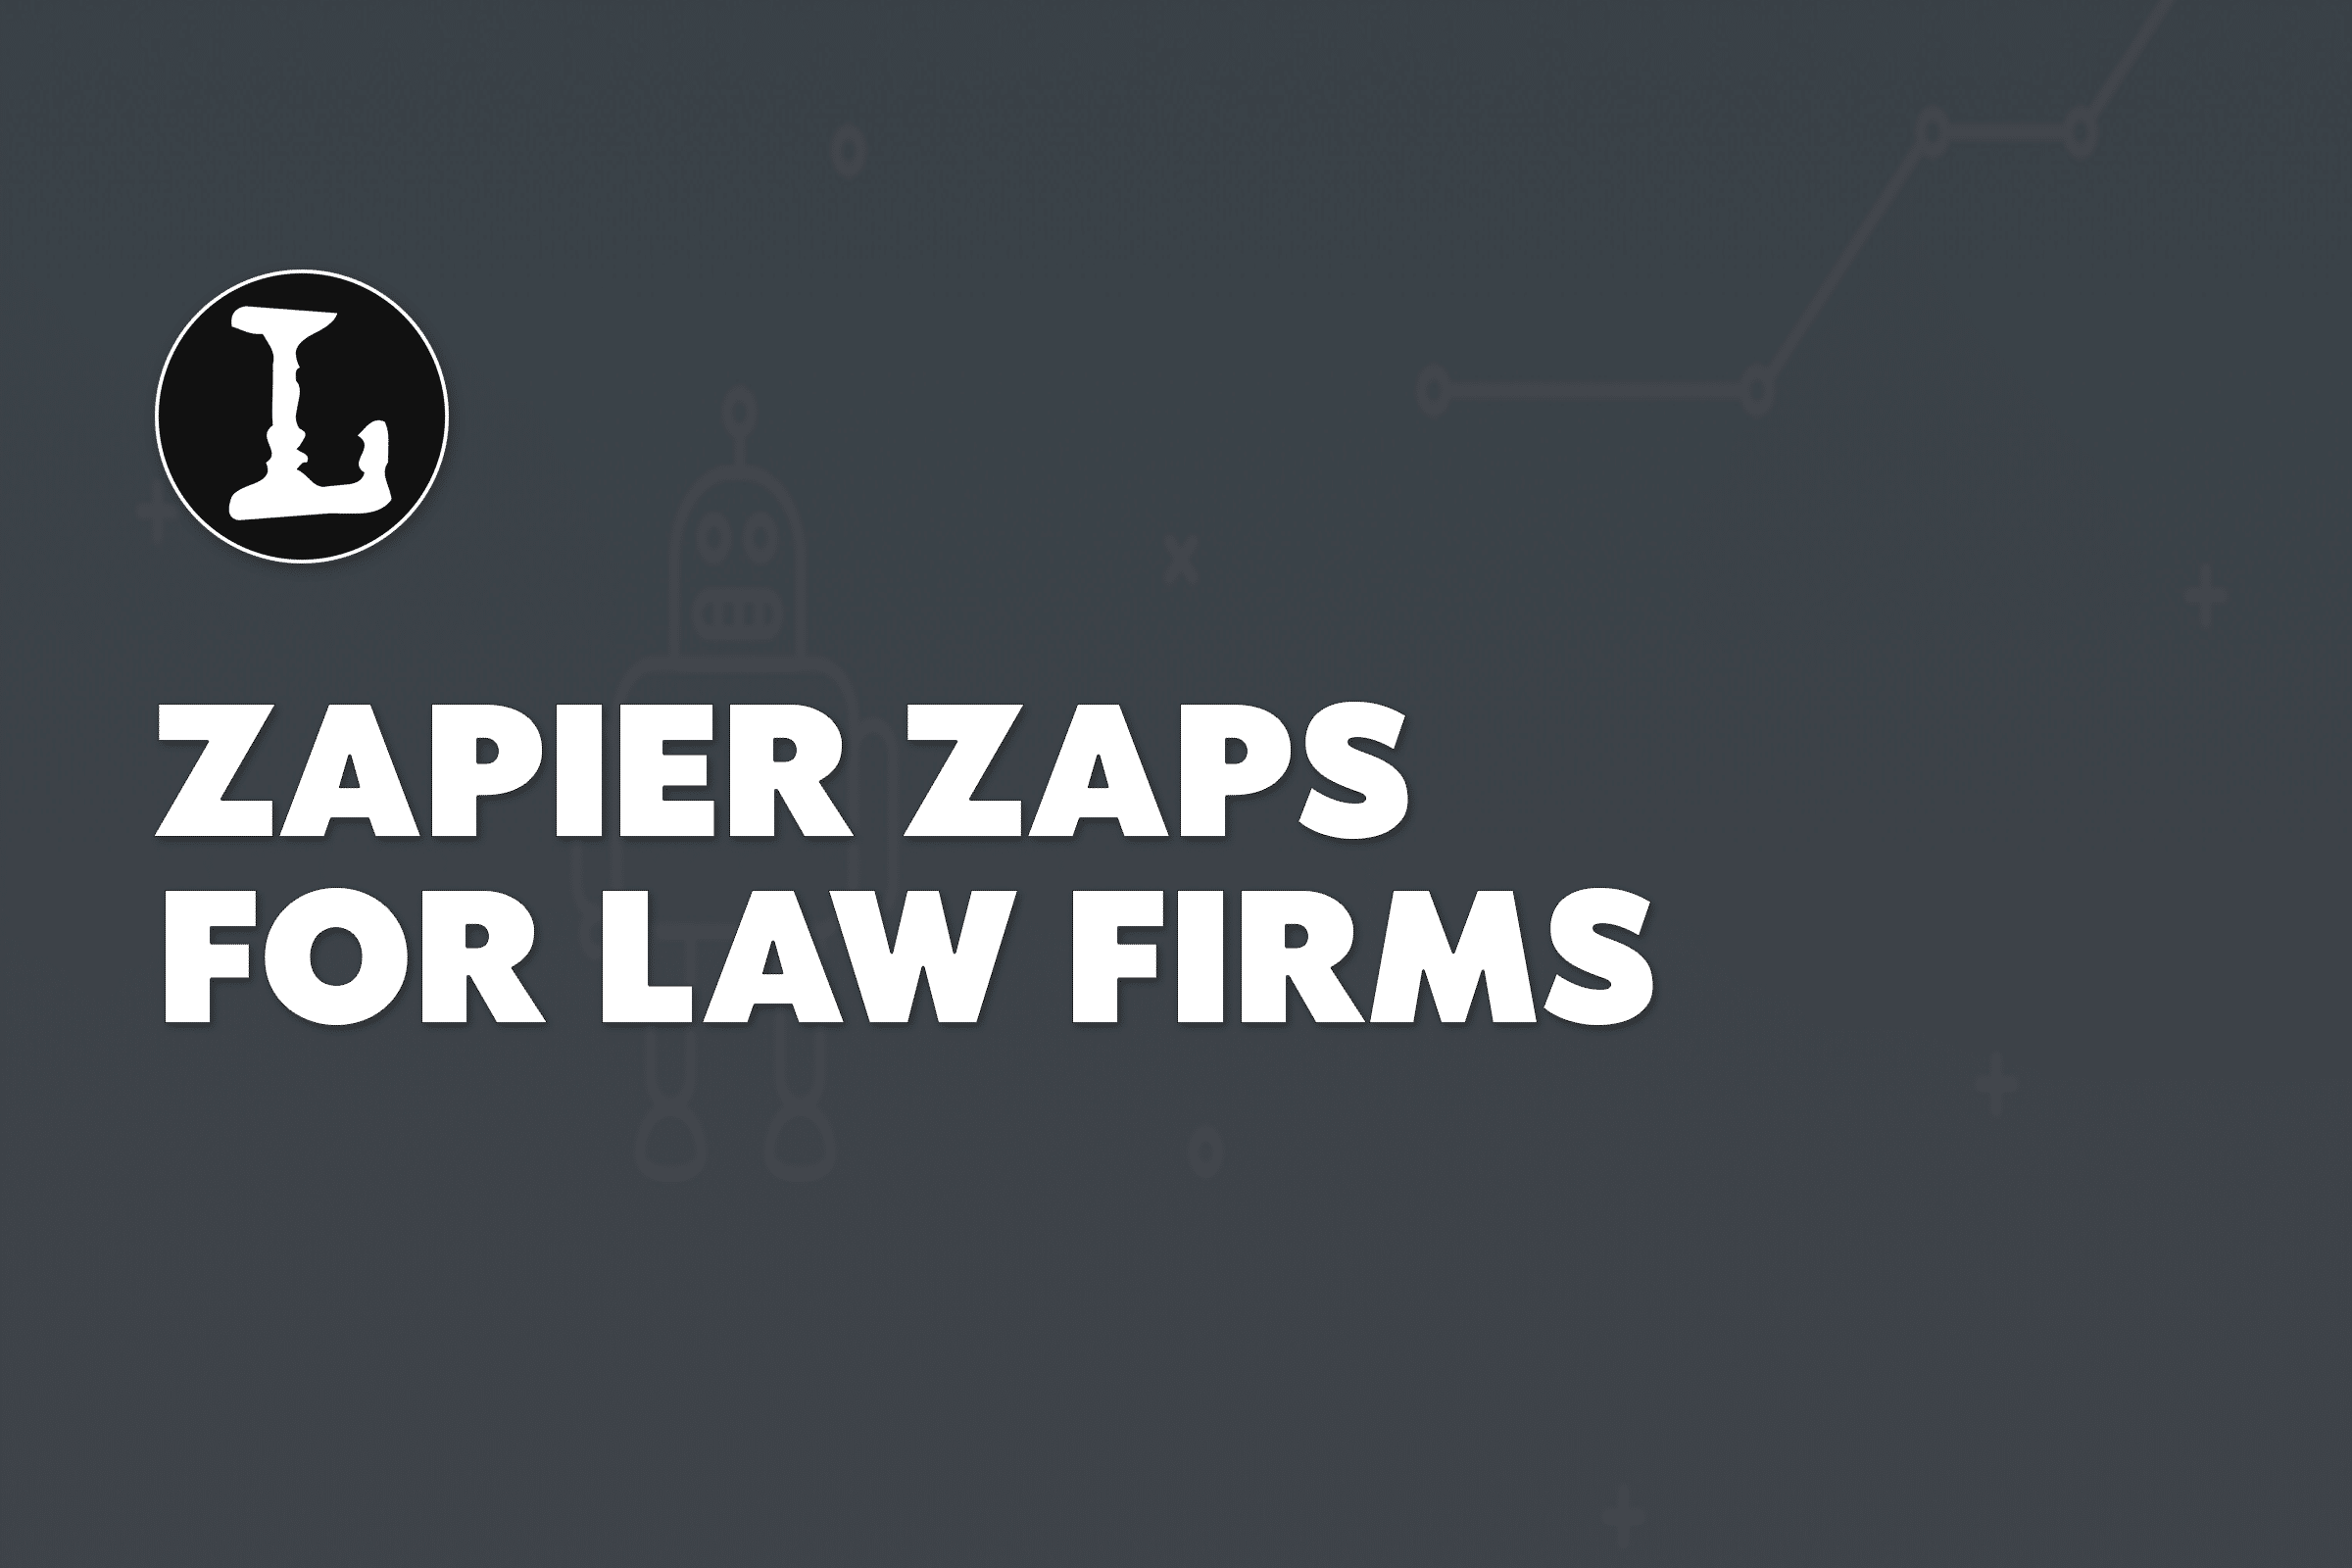 Zapier Zaps for Law Firms featured image